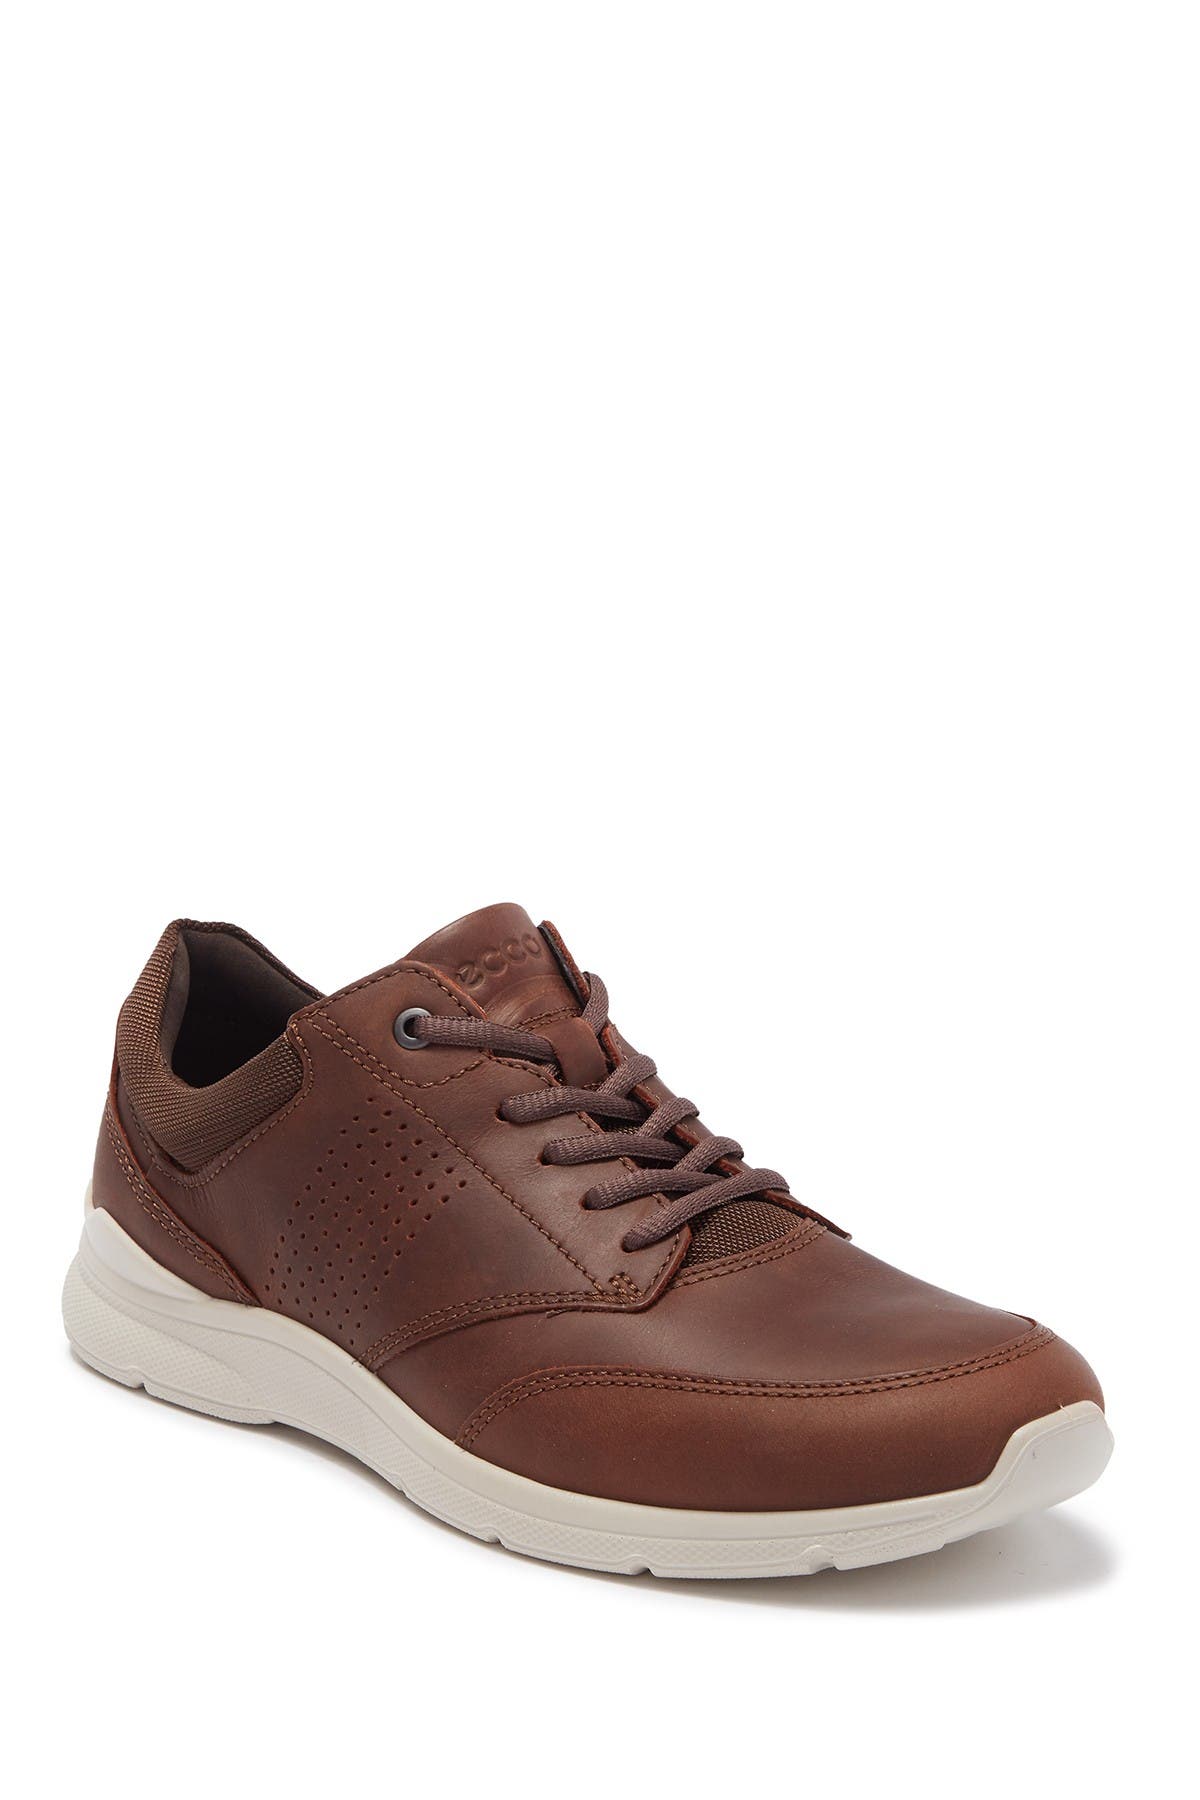 ECCO | Irving Lace-Up Leather Sneaker 